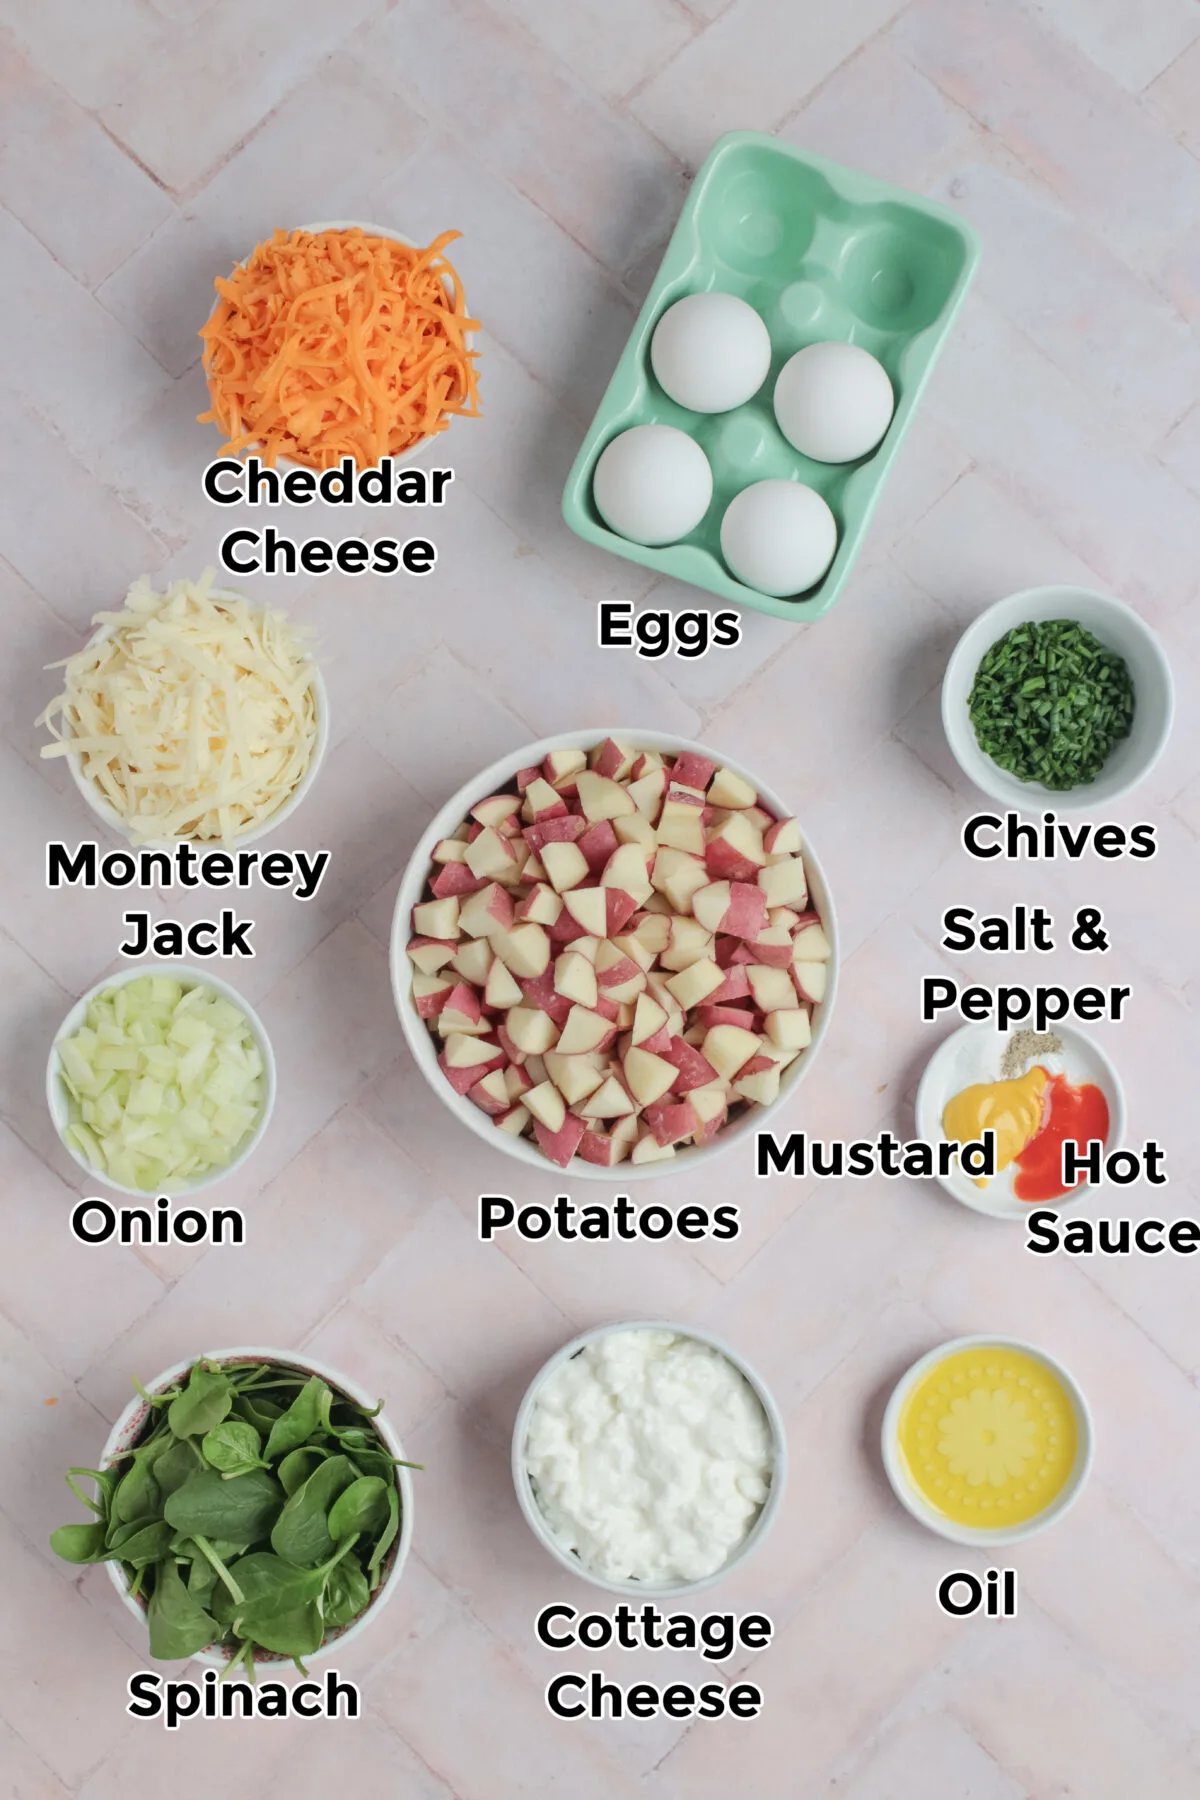 Ingredients for potato, cheddar and chive bakes.